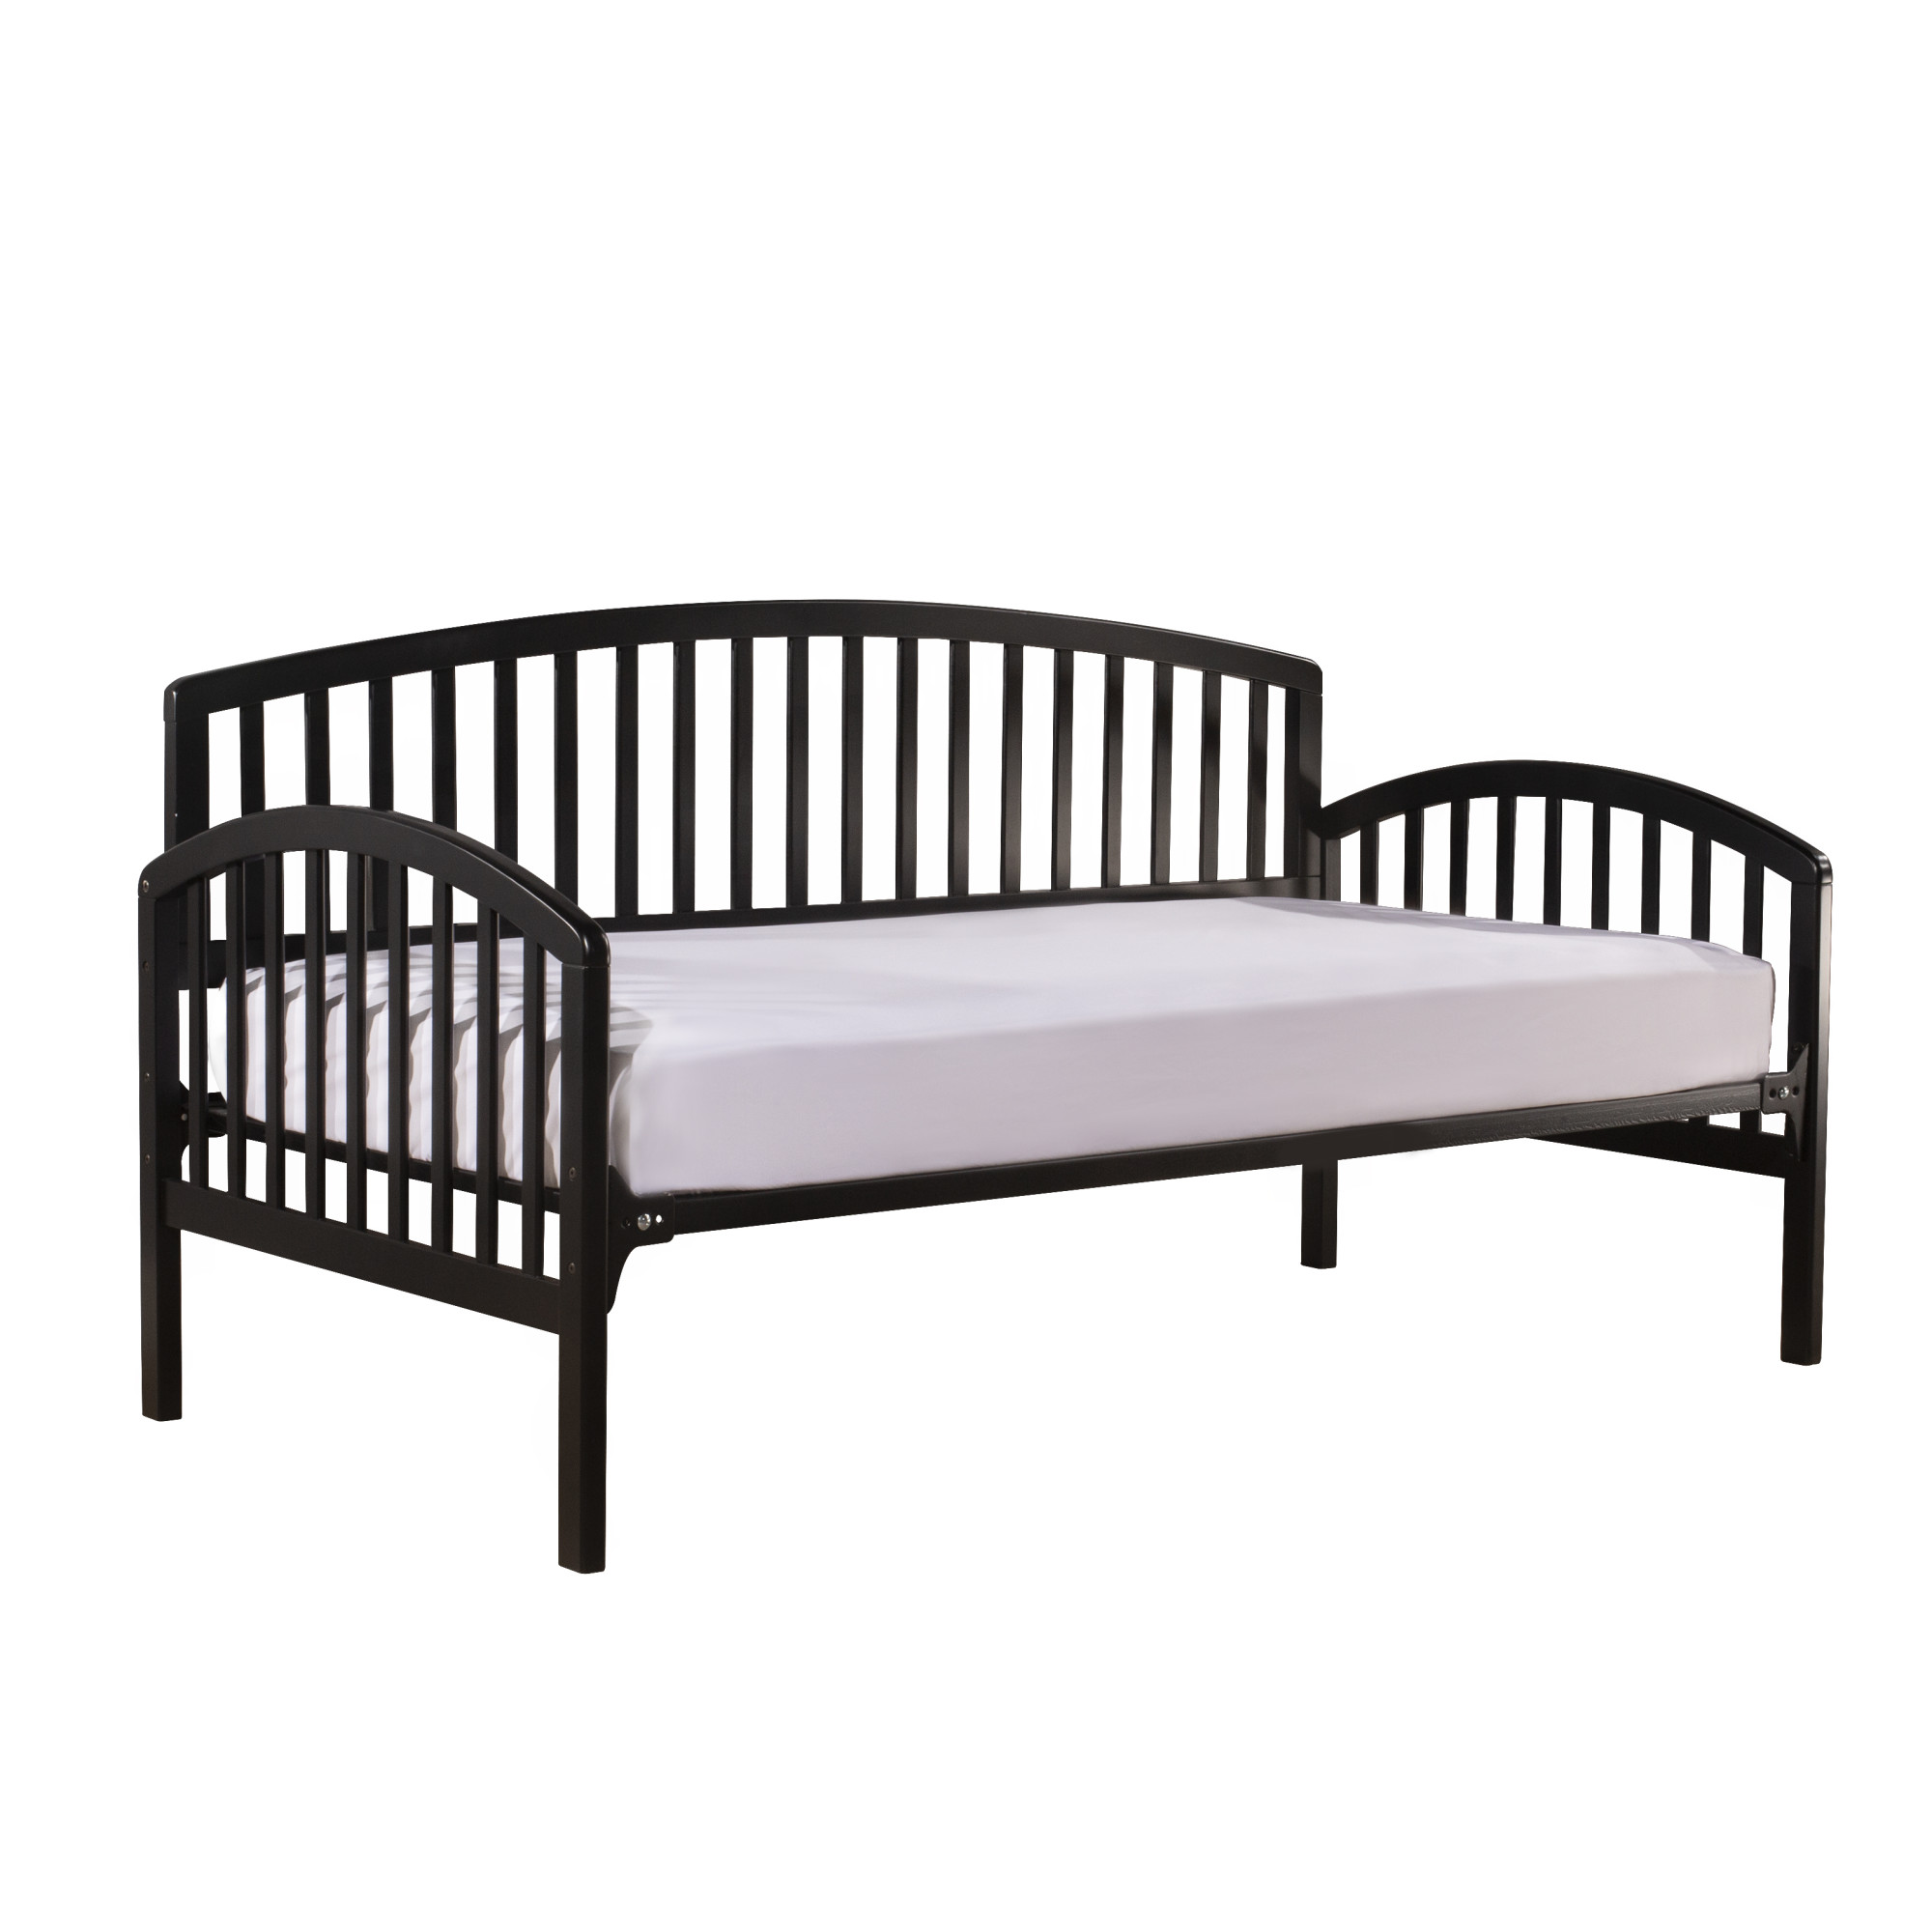 Hillsdale Furniture Carolina Wood Twin Daybed, Rubbed Black - image 5 of 11